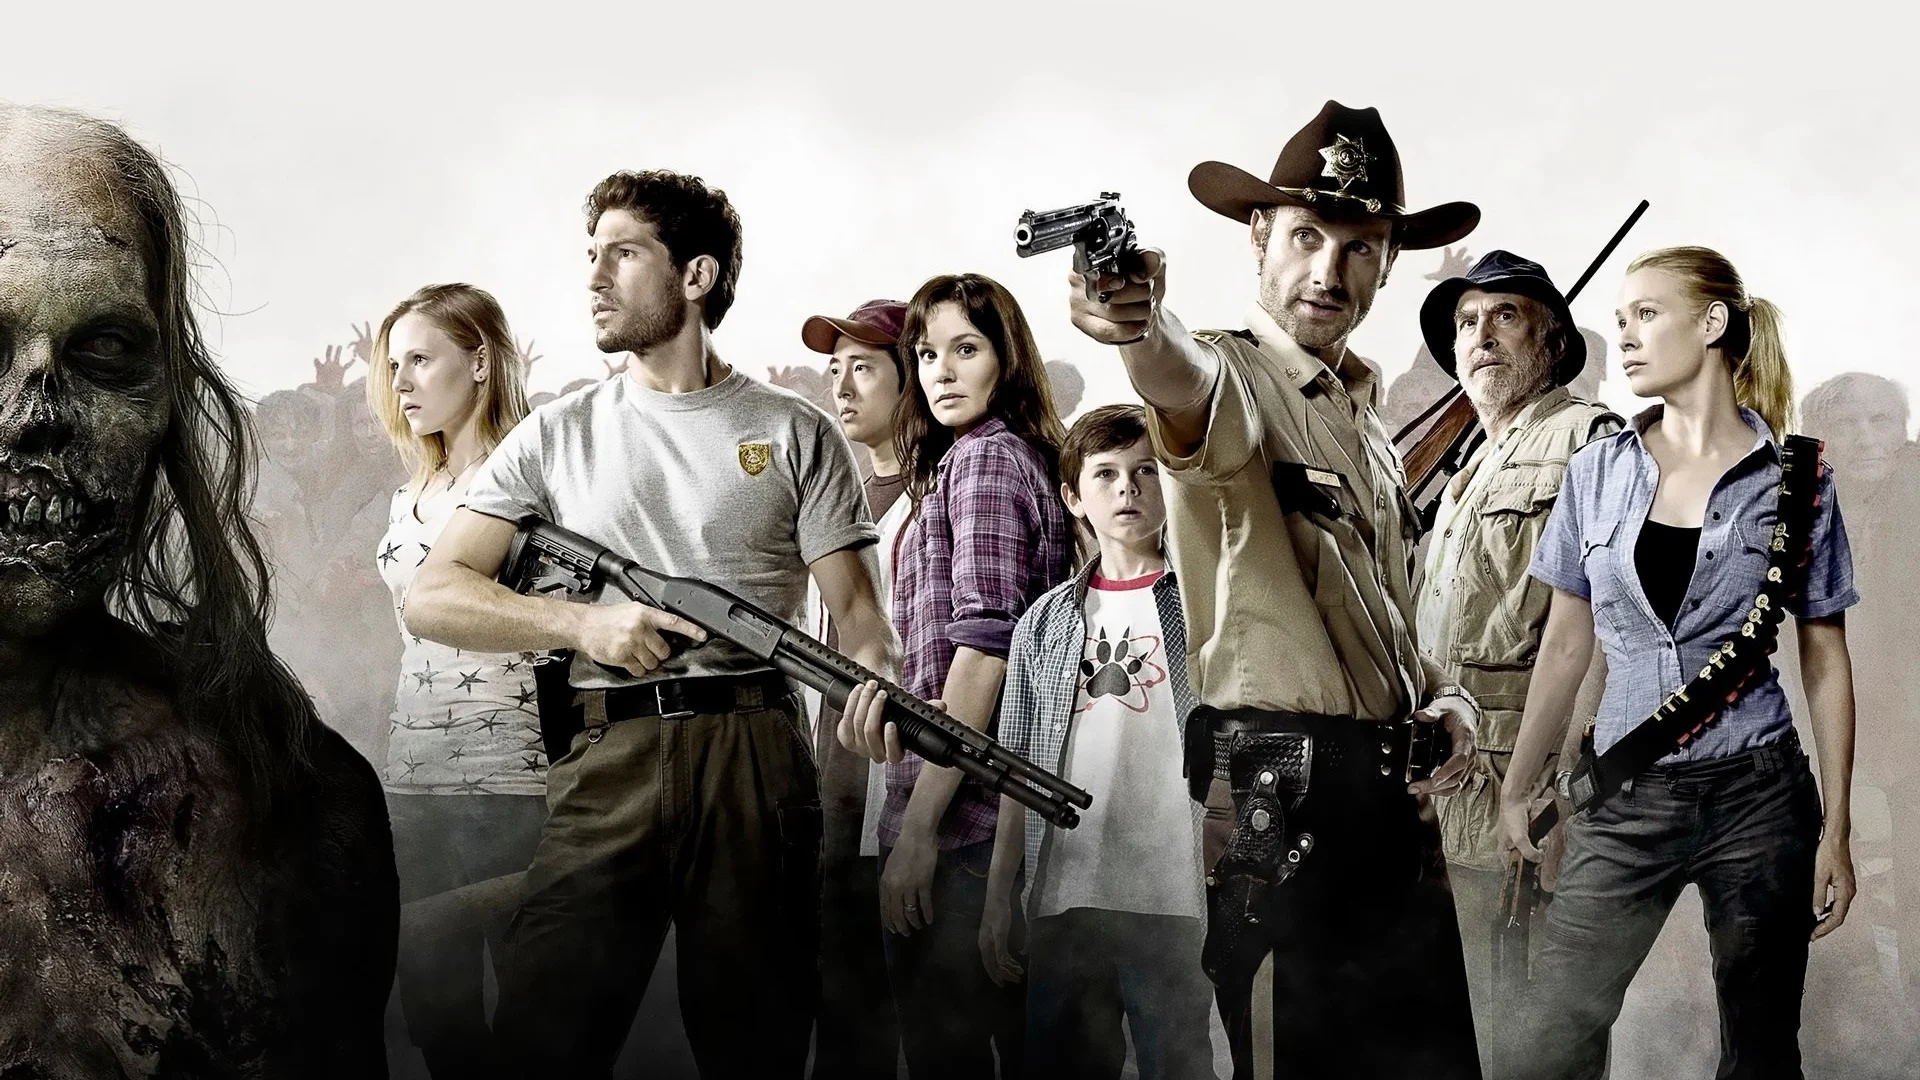 The Walking Dead Survival Guide for Digital Marketers [Infographic]